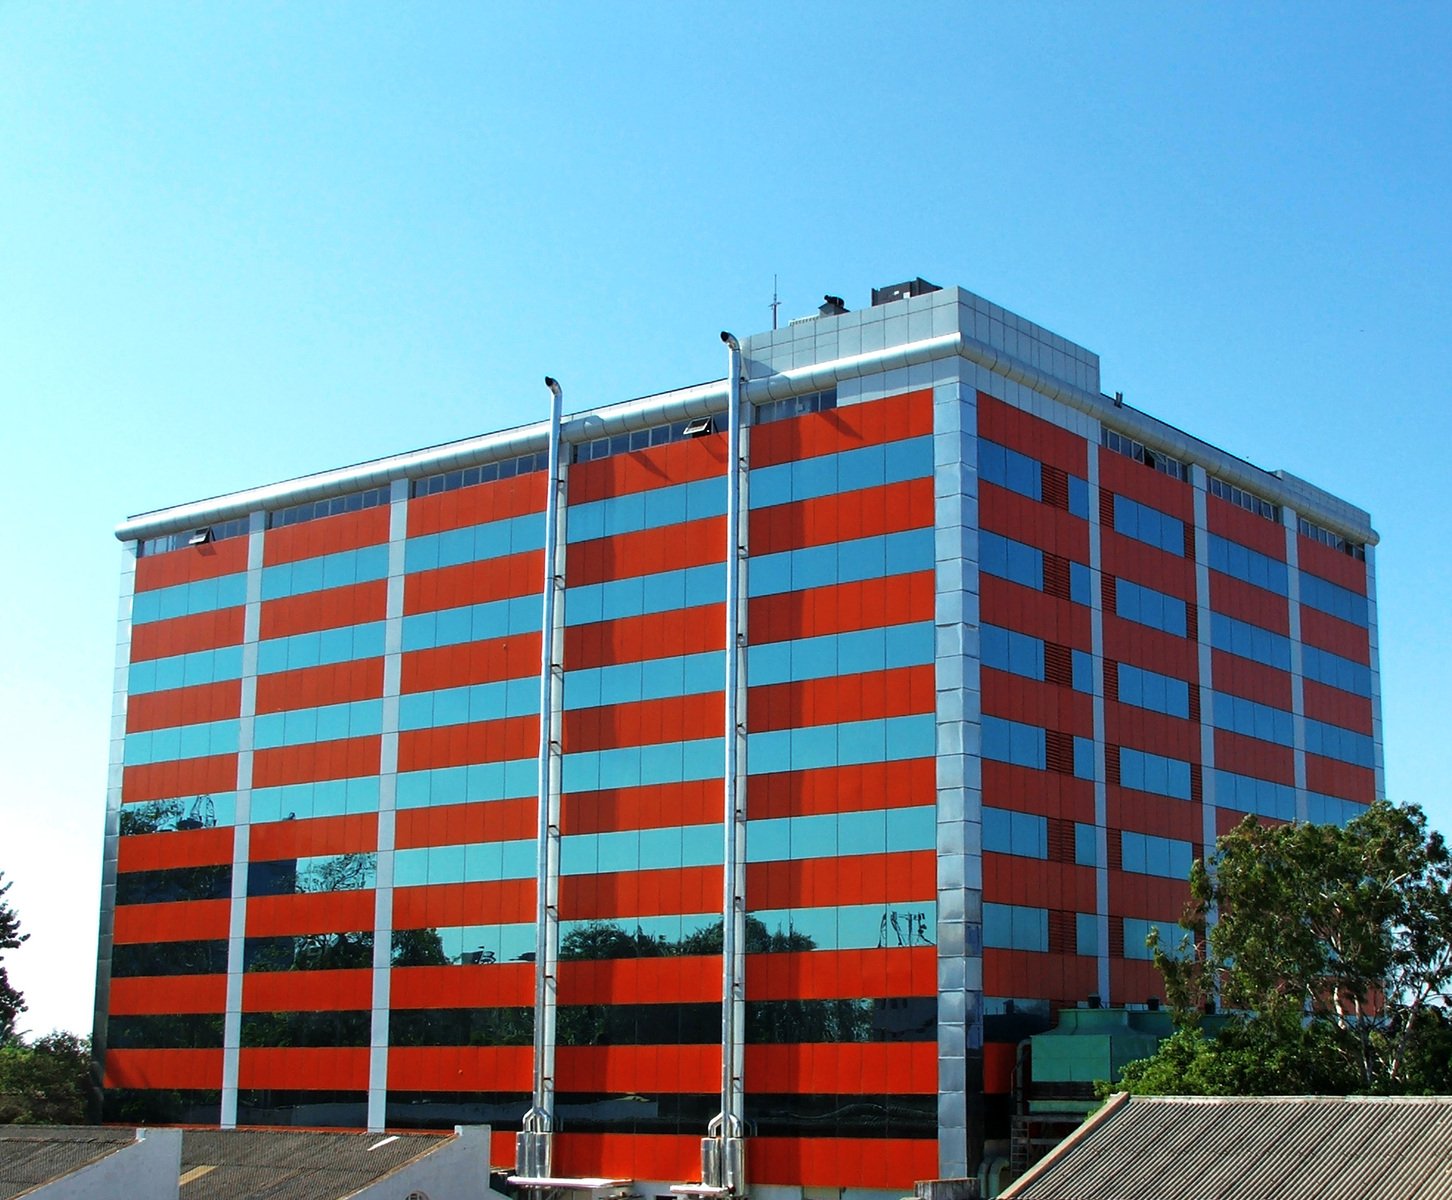 the tall building has bright orange and blue windows